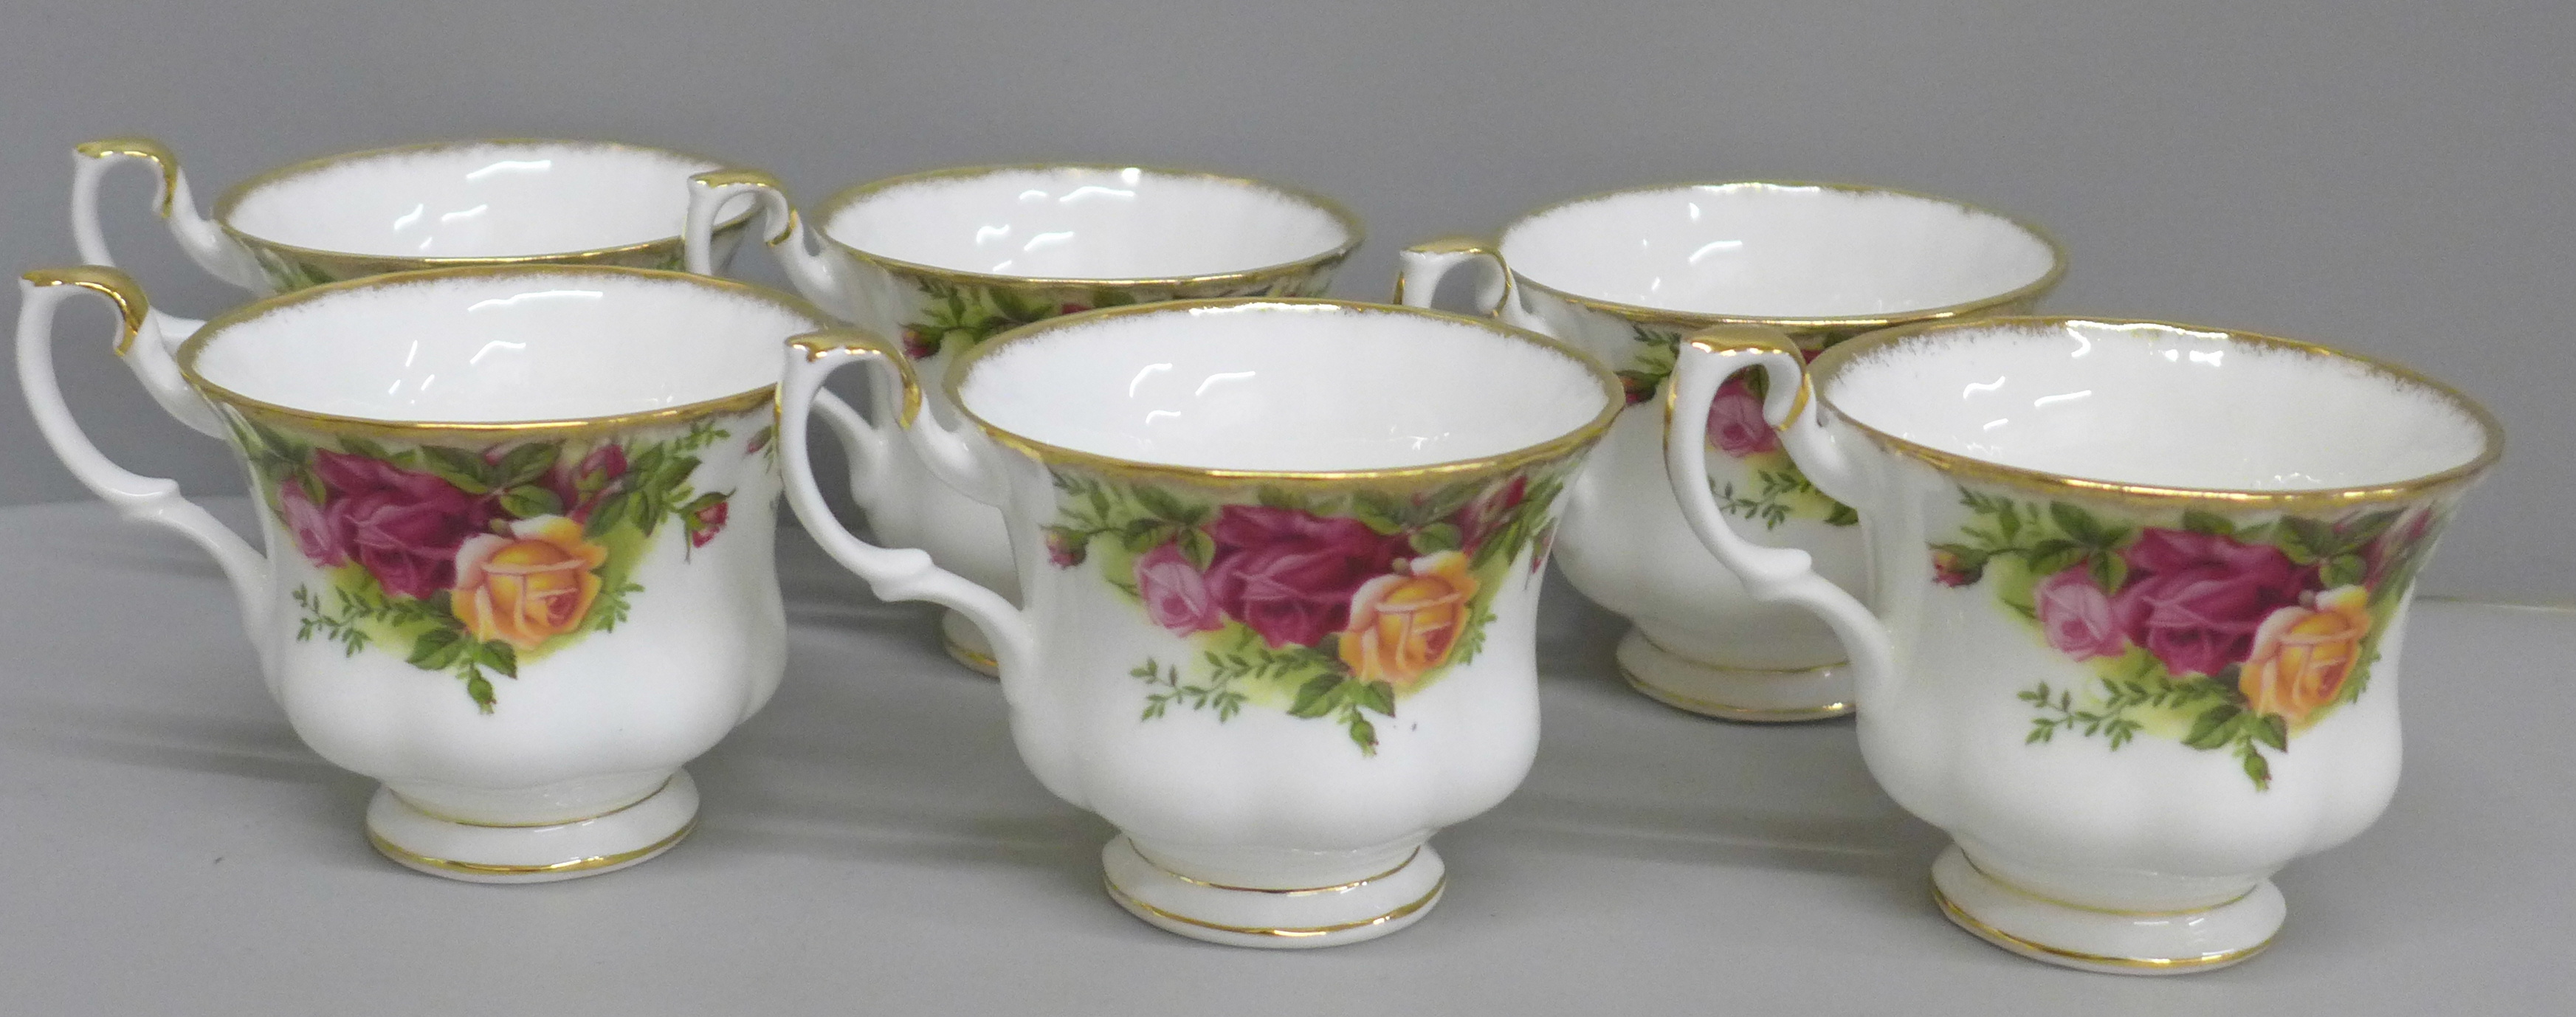 A set of six Royal Albert Old Country Roses tea cups